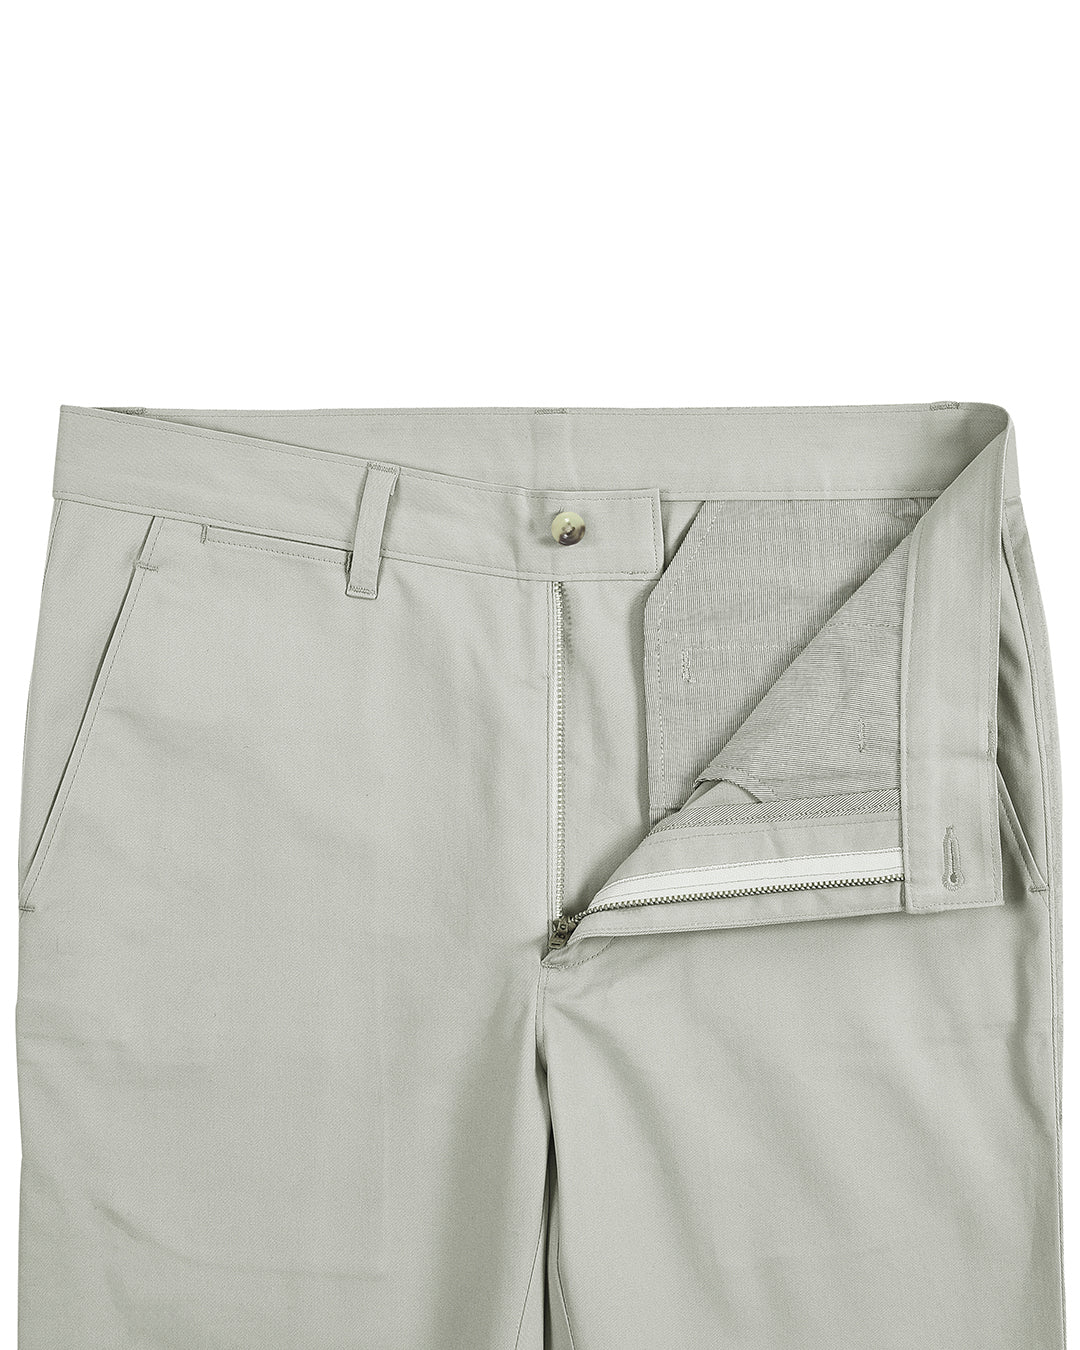 Open front view of custom Genoa Chino pants for men by Luxire in pale green